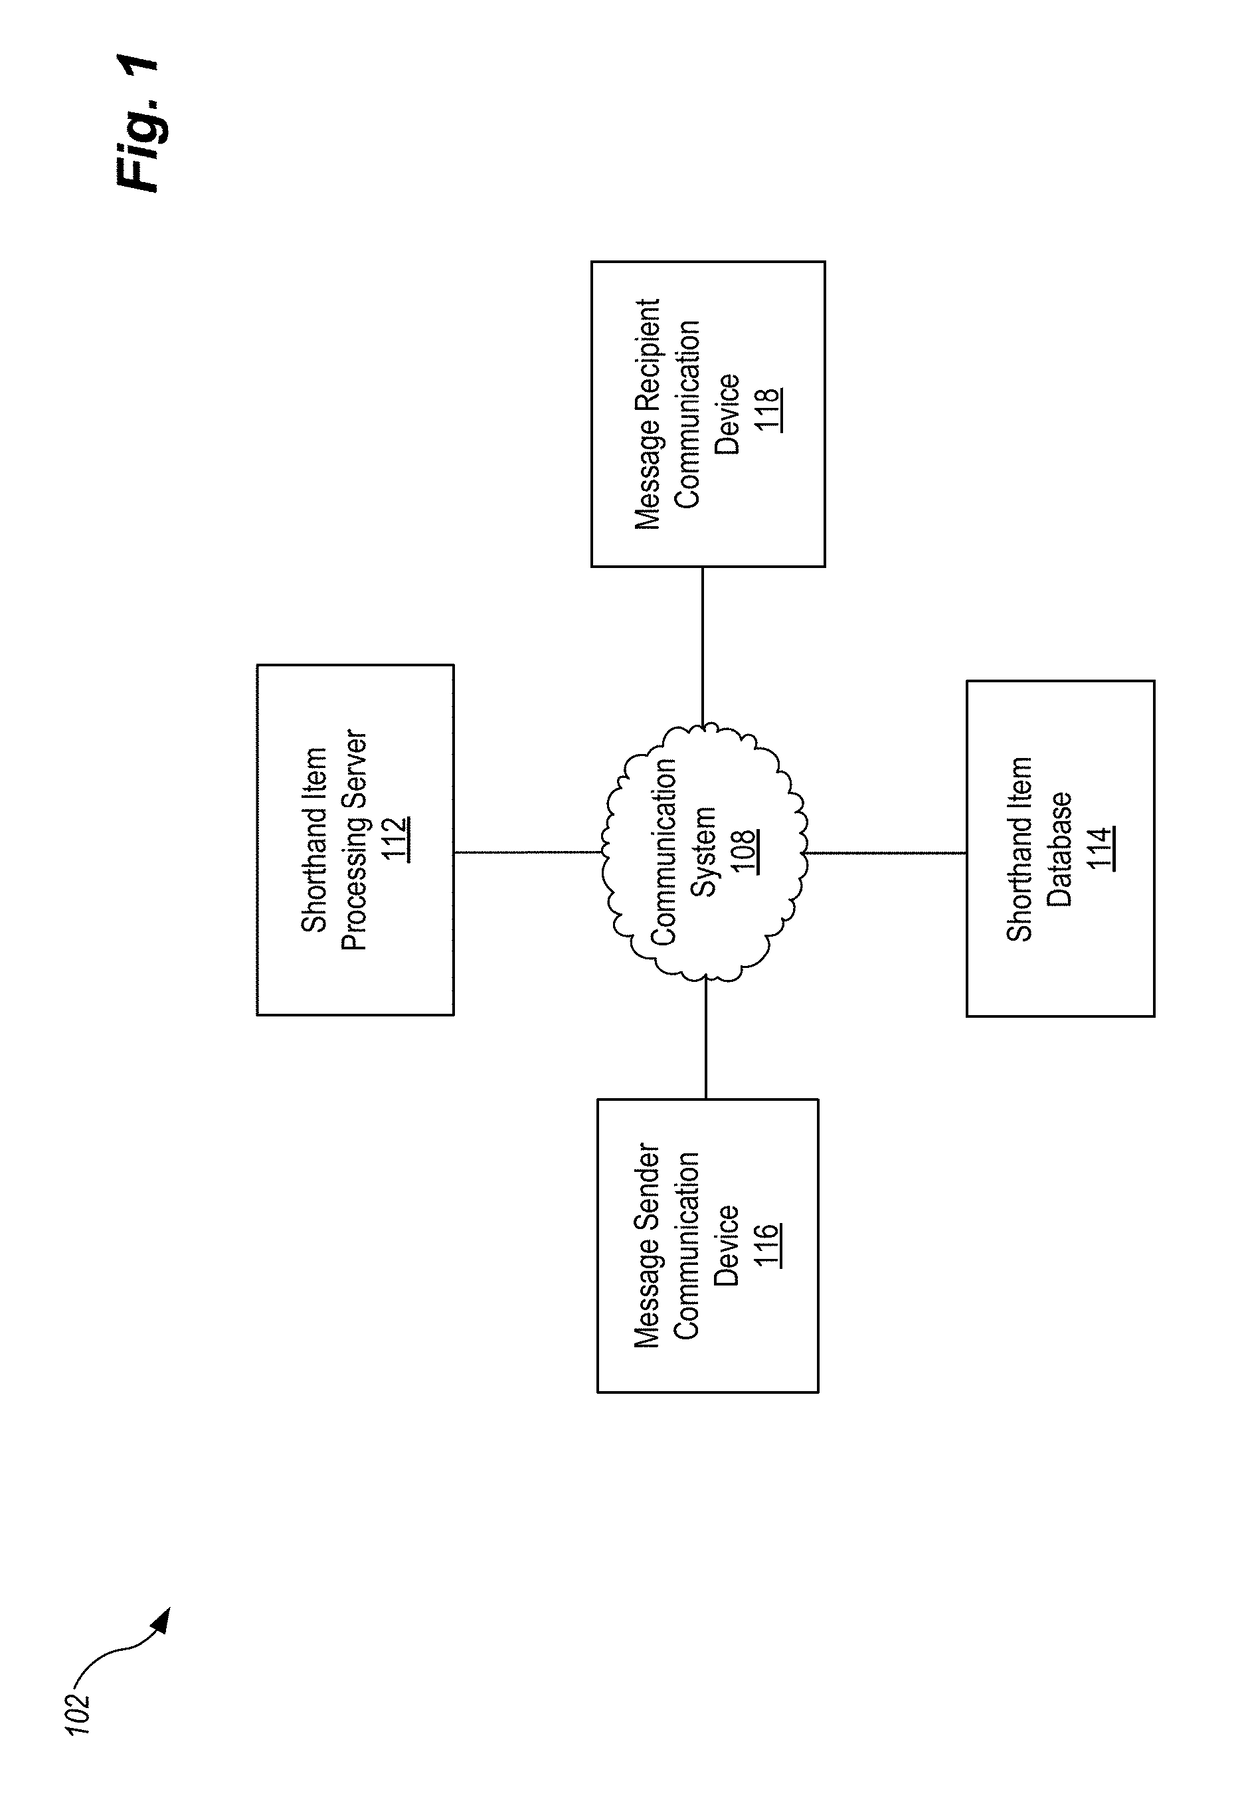 Systems and methods for processing shorthand items in electronic communications